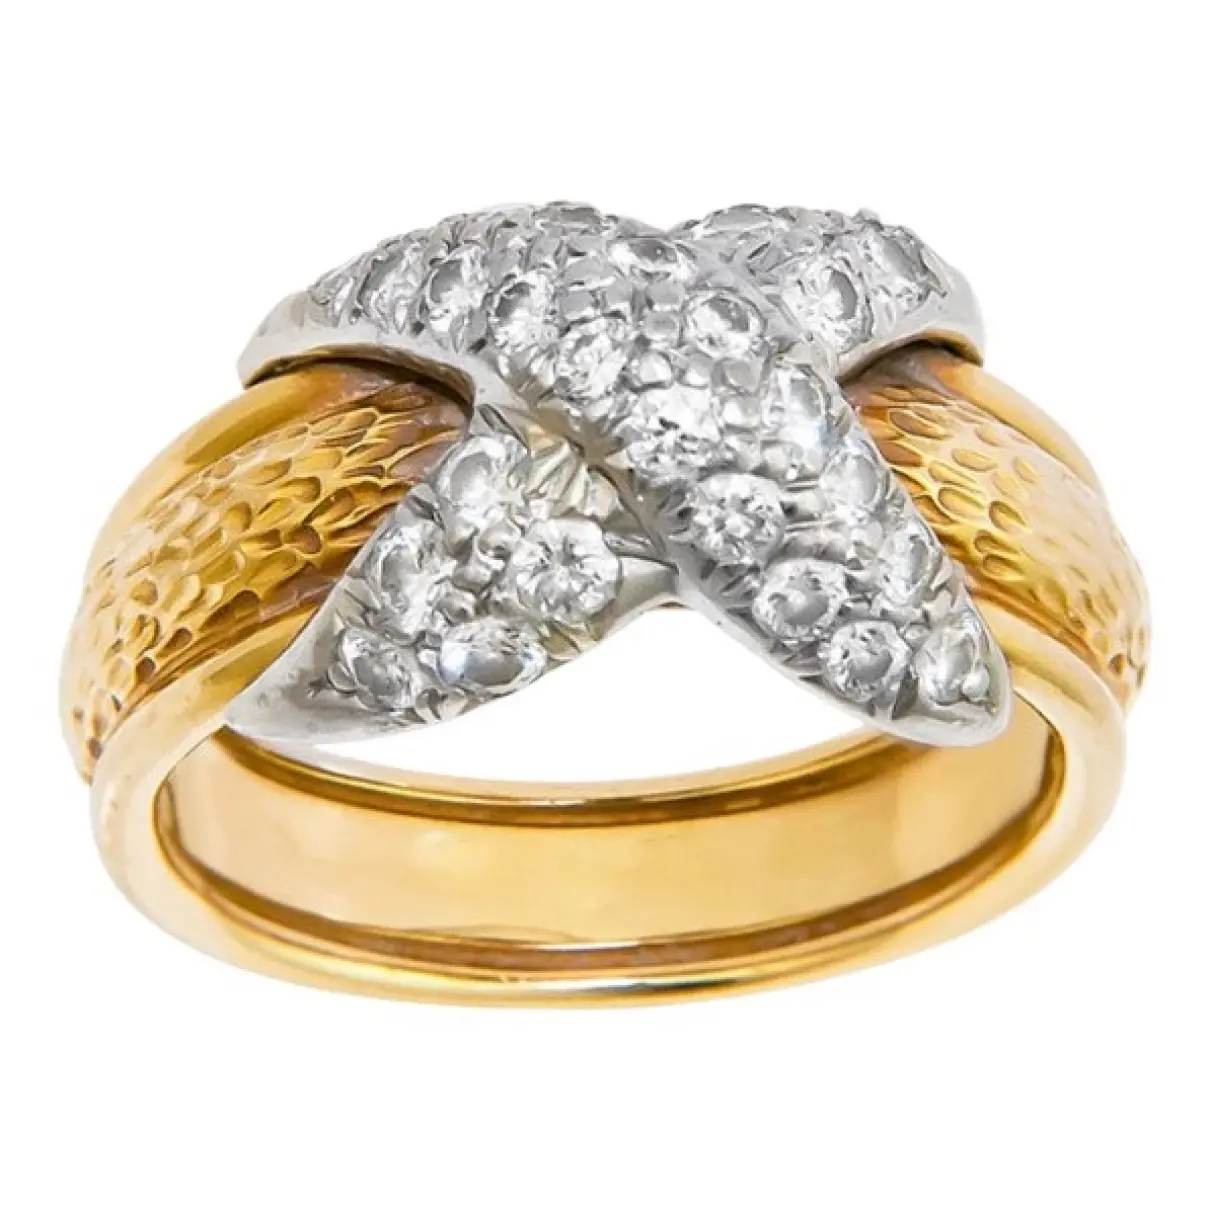 Schlumberger yellow gold ring Tiffany & Co